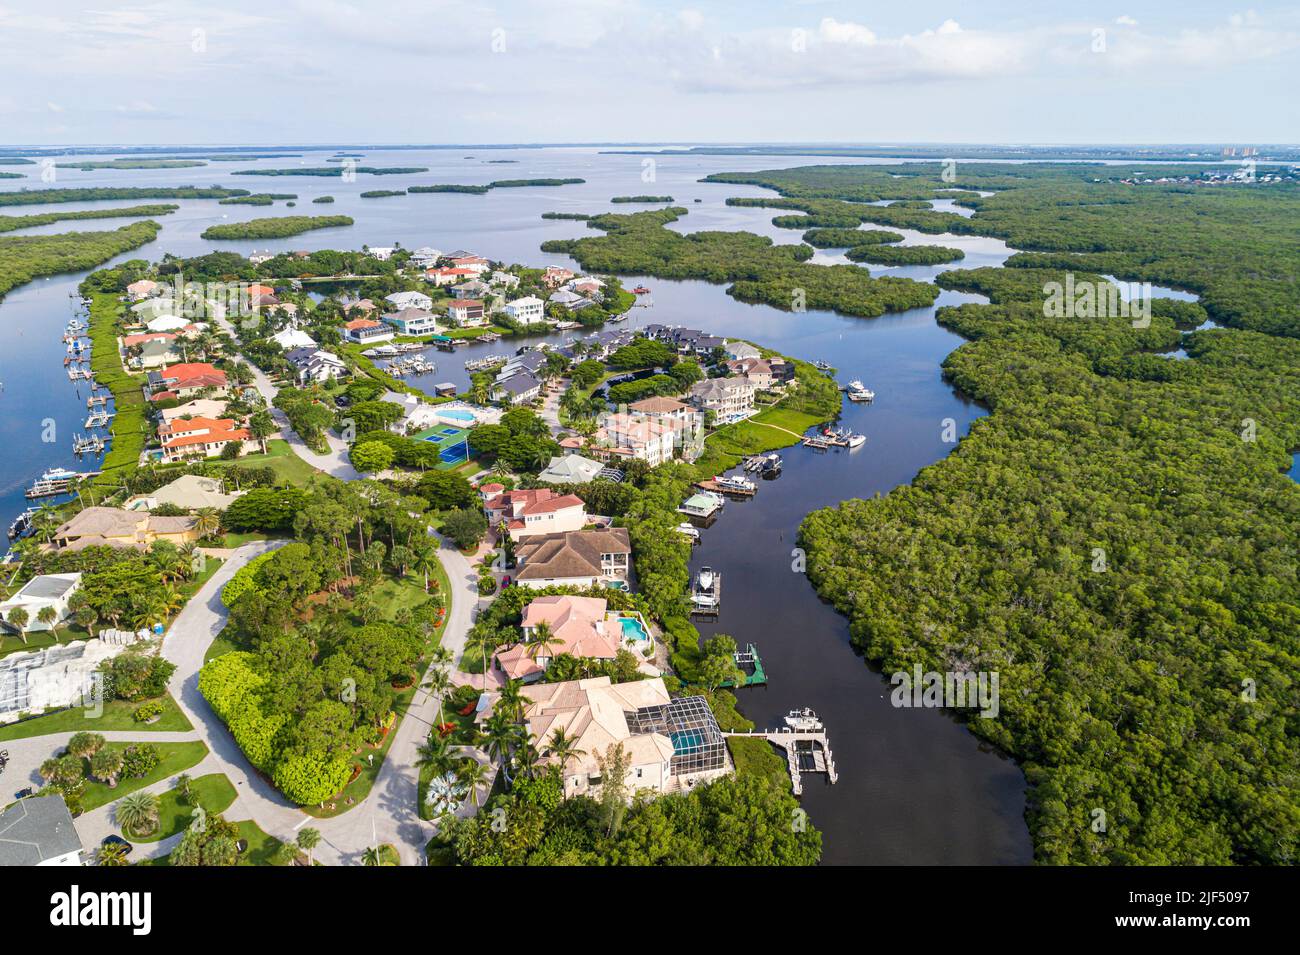 Fort Ft. Myers Florida,Connie Mack Island gated private community houses homes development encroachment,wetlands Punta Rassa Cove Gulf of Mexico,aeria Stock Photo